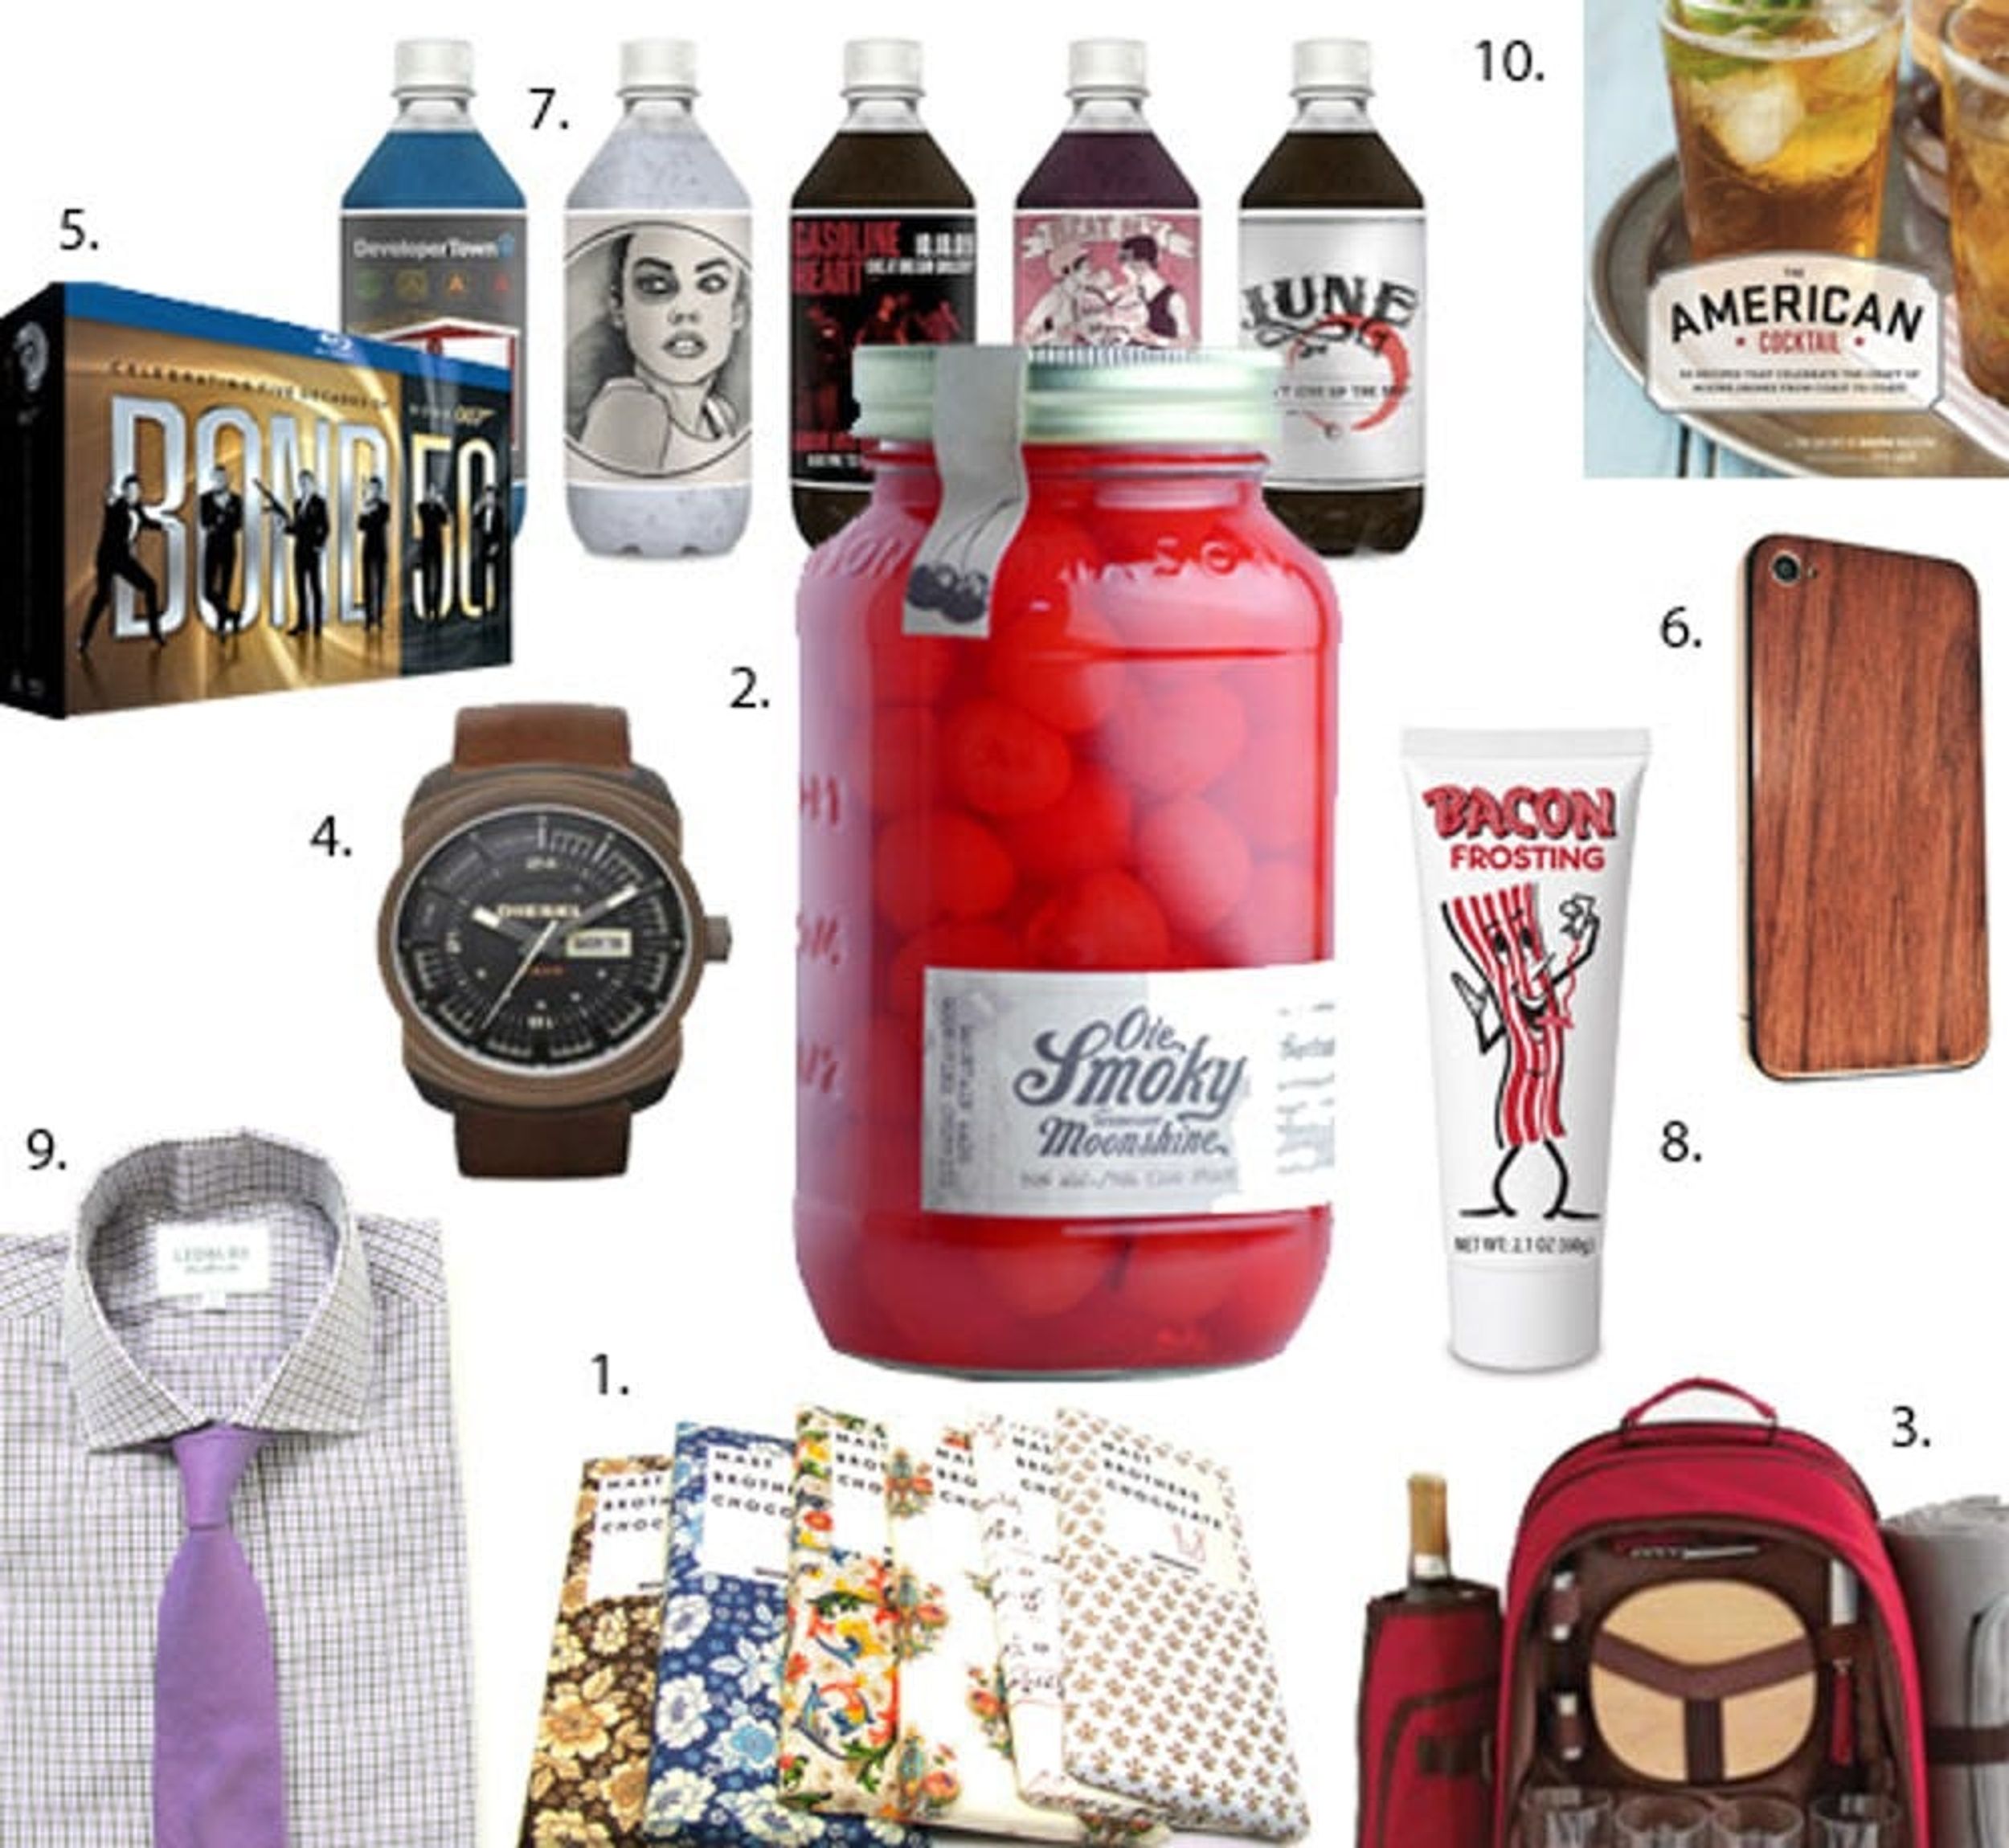 Moonshine Cherries & Bacon Frosting: 10 Valentine’s Gifts For Dudes